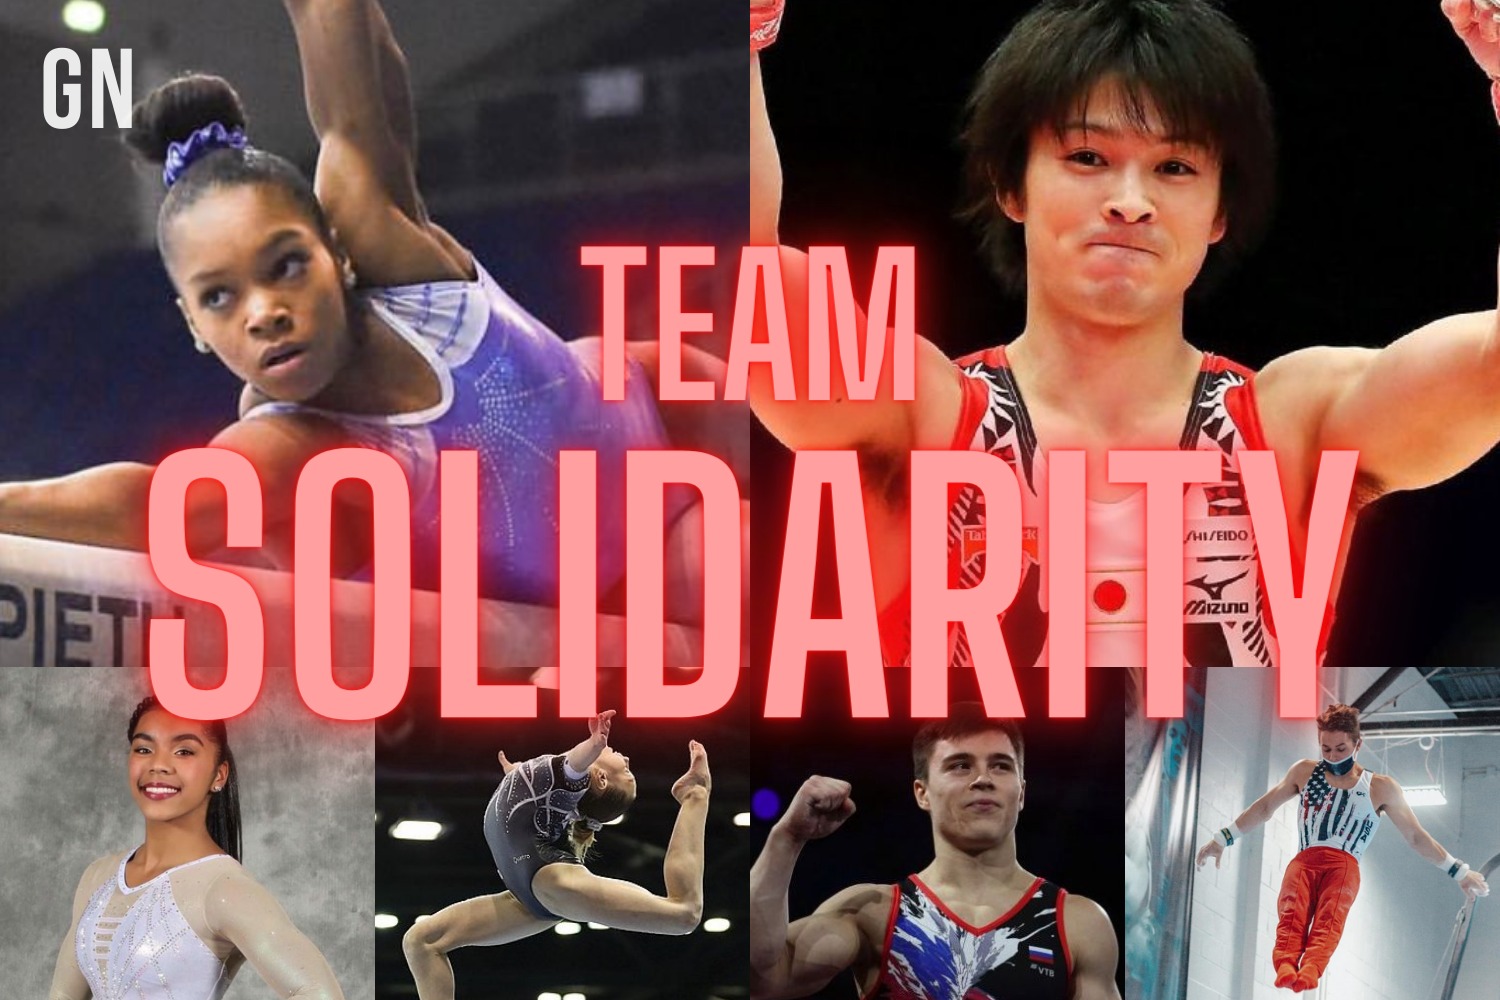 Copy of FIG Friendship and Solidarity competition: Team Solidarity preview